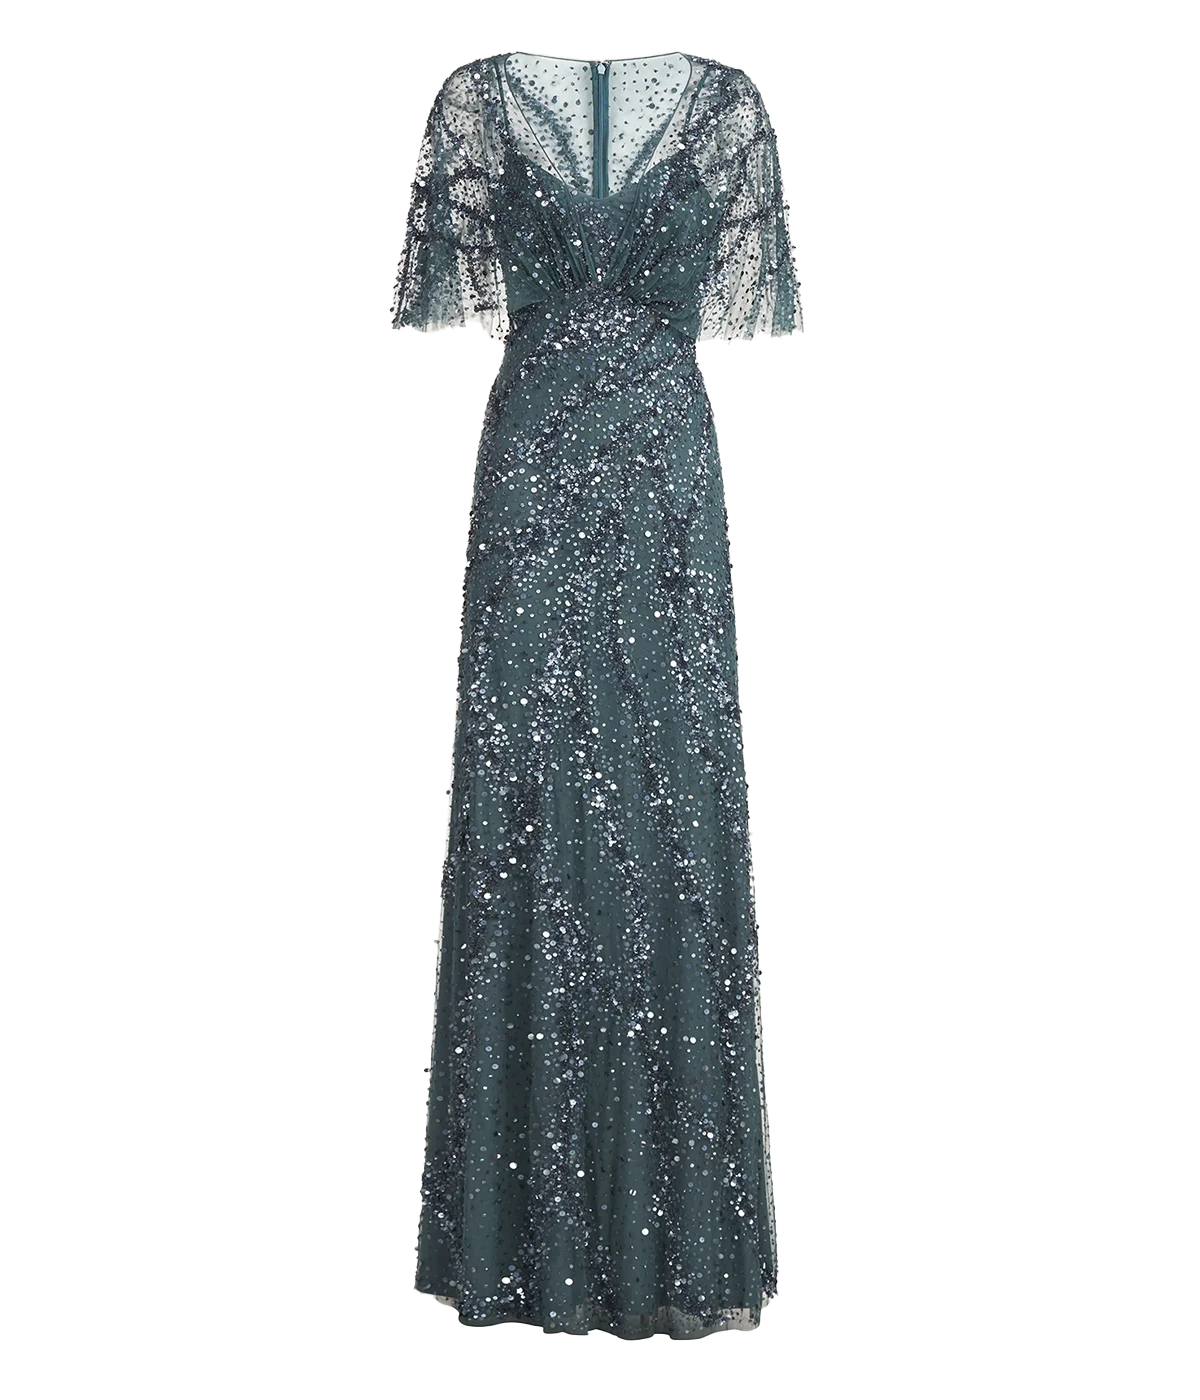 A special event black tie gown, full length short sleeve, v neckline and sequin detailing in a blue colourway. Bra friendly, comfortable, Christmas Dress, special occasion. 